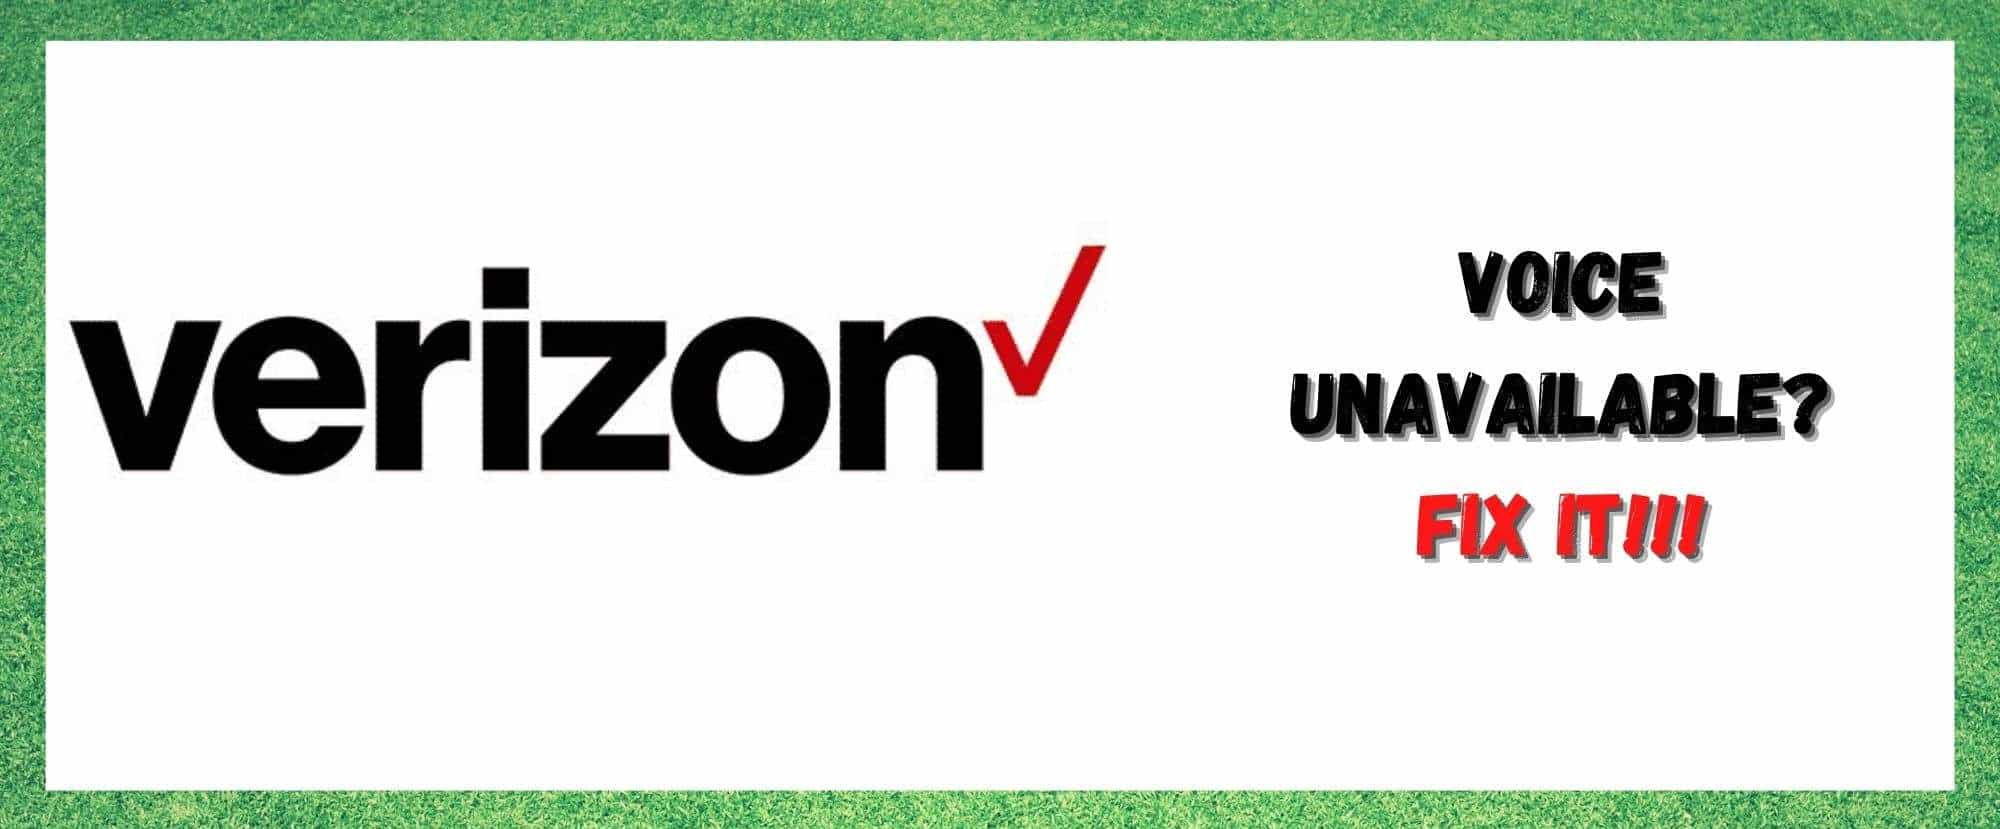 Verizon Voicemail Unavailable: Could Not Authorize Accessを修正する6つの方法